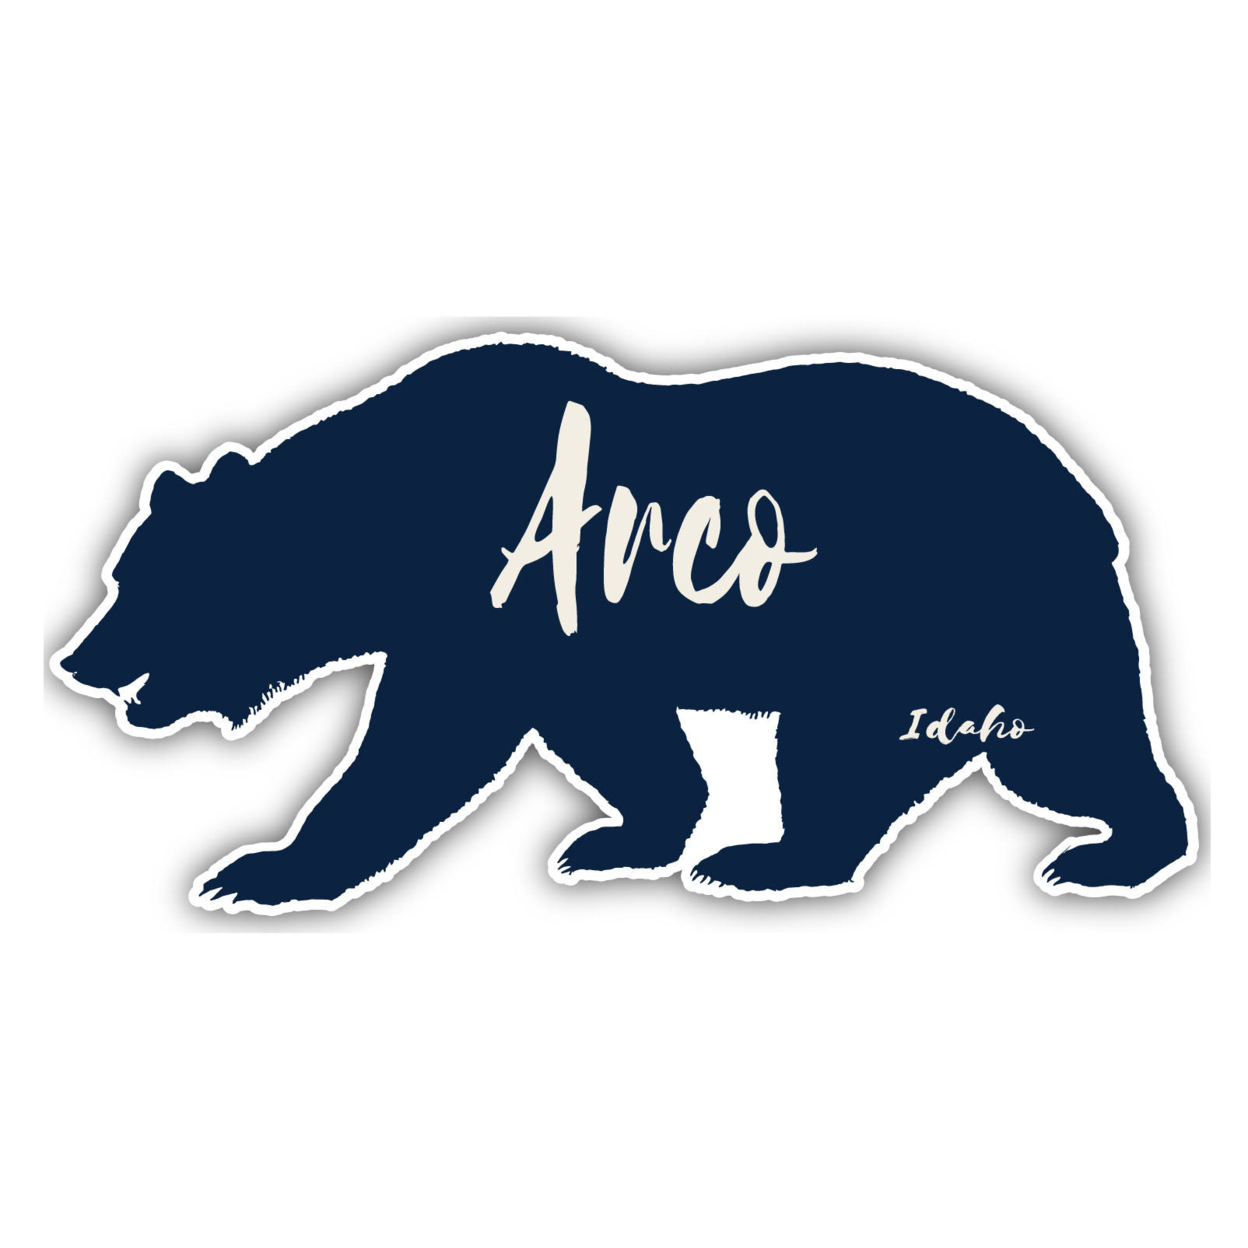 Arco Idaho Souvenir Decorative Stickers (Choose Theme And Size) - Single Unit, 6-Inch, Great Outdoors